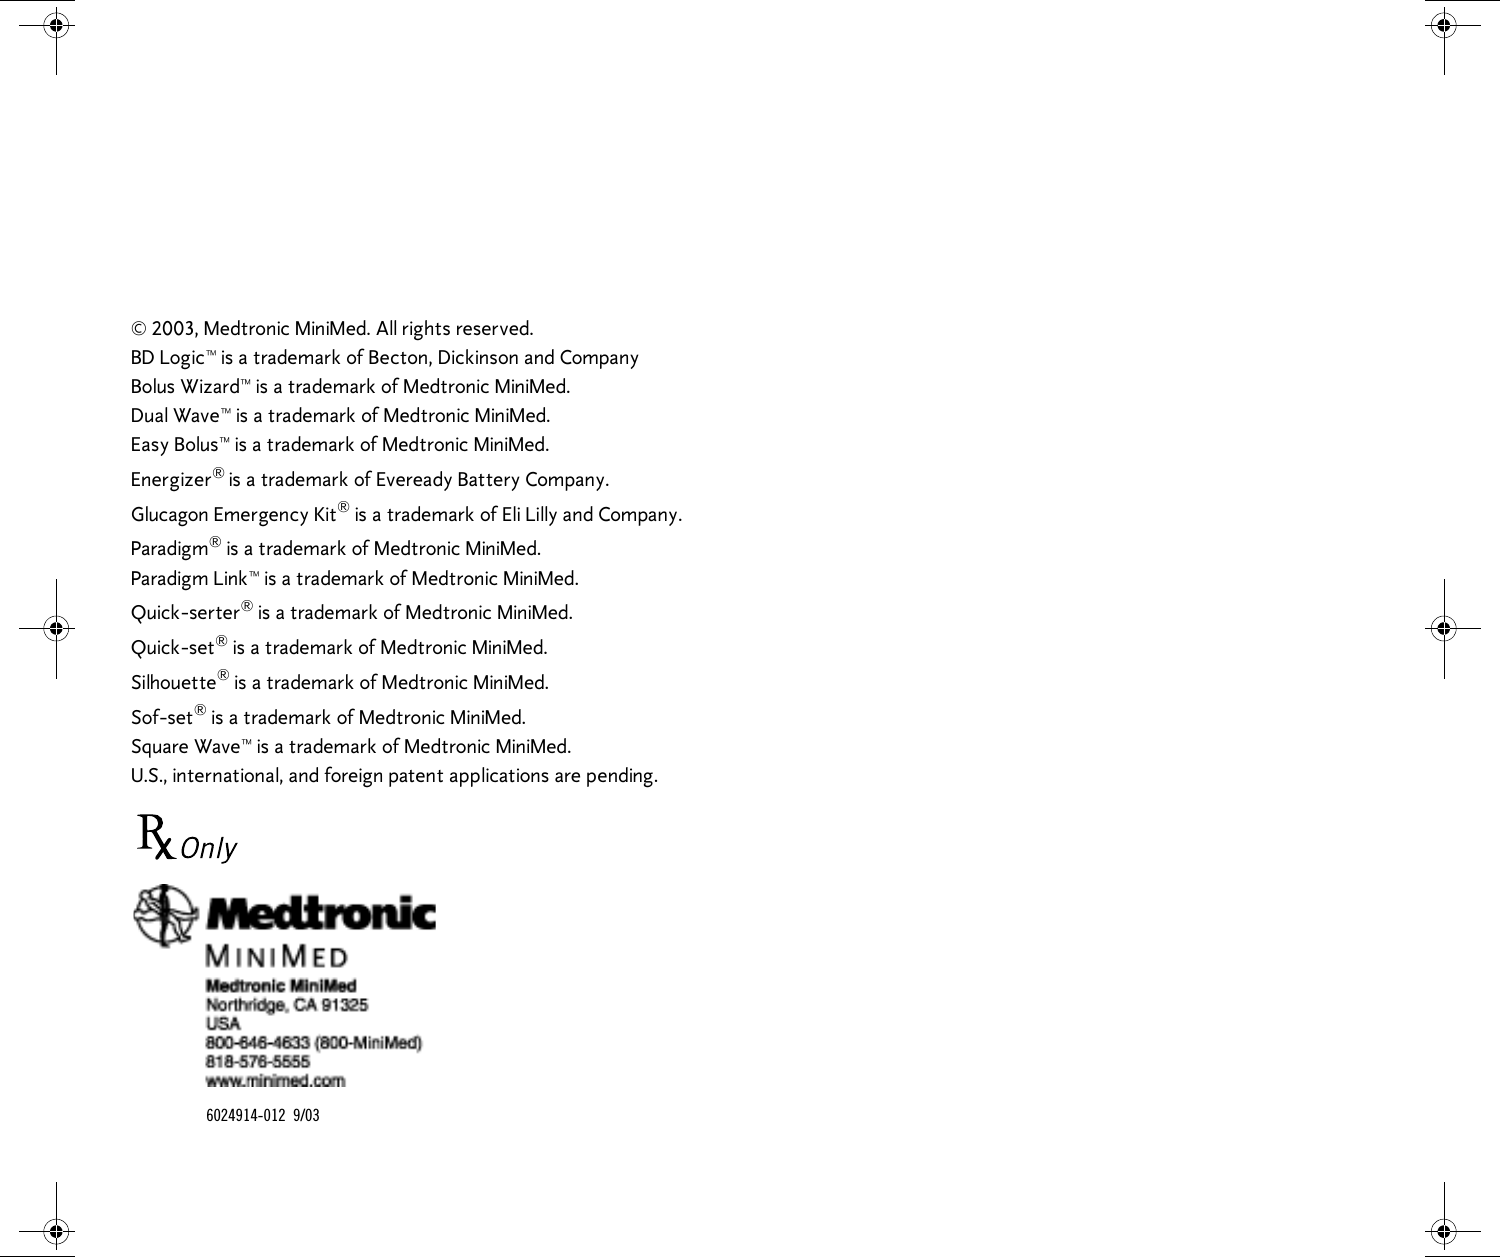  © 2003, Medtronic MiniMed. All rights reserved.BD Logic™ is a trademark of Becton, Dickinson and CompanyBolus Wizard™ is a trademark of Medtronic MiniMed.Dual Wave™ is a trademark of Medtronic MiniMed.Easy Bolus™ is a trademark of Medtronic MiniMed.Energizer® is a trademark of Eveready Battery Company.Glucagon Emergency Kit® is a trademark of Eli Lilly and Company.Paradigm® is a trademark of Medtronic MiniMed.Paradigm Link™ is a trademark of Medtronic MiniMed.Quick-serter® is a trademark of Medtronic MiniMed.Quick-set® is a trademark of Medtronic MiniMed.Silhouette® is a trademark of Medtronic MiniMed.Sof-set® is a trademark of Medtronic MiniMed.Square Wave™ is a trademark of Medtronic MiniMed.U.S., international, and foreign patent applications are pending.6024914-012 9/03